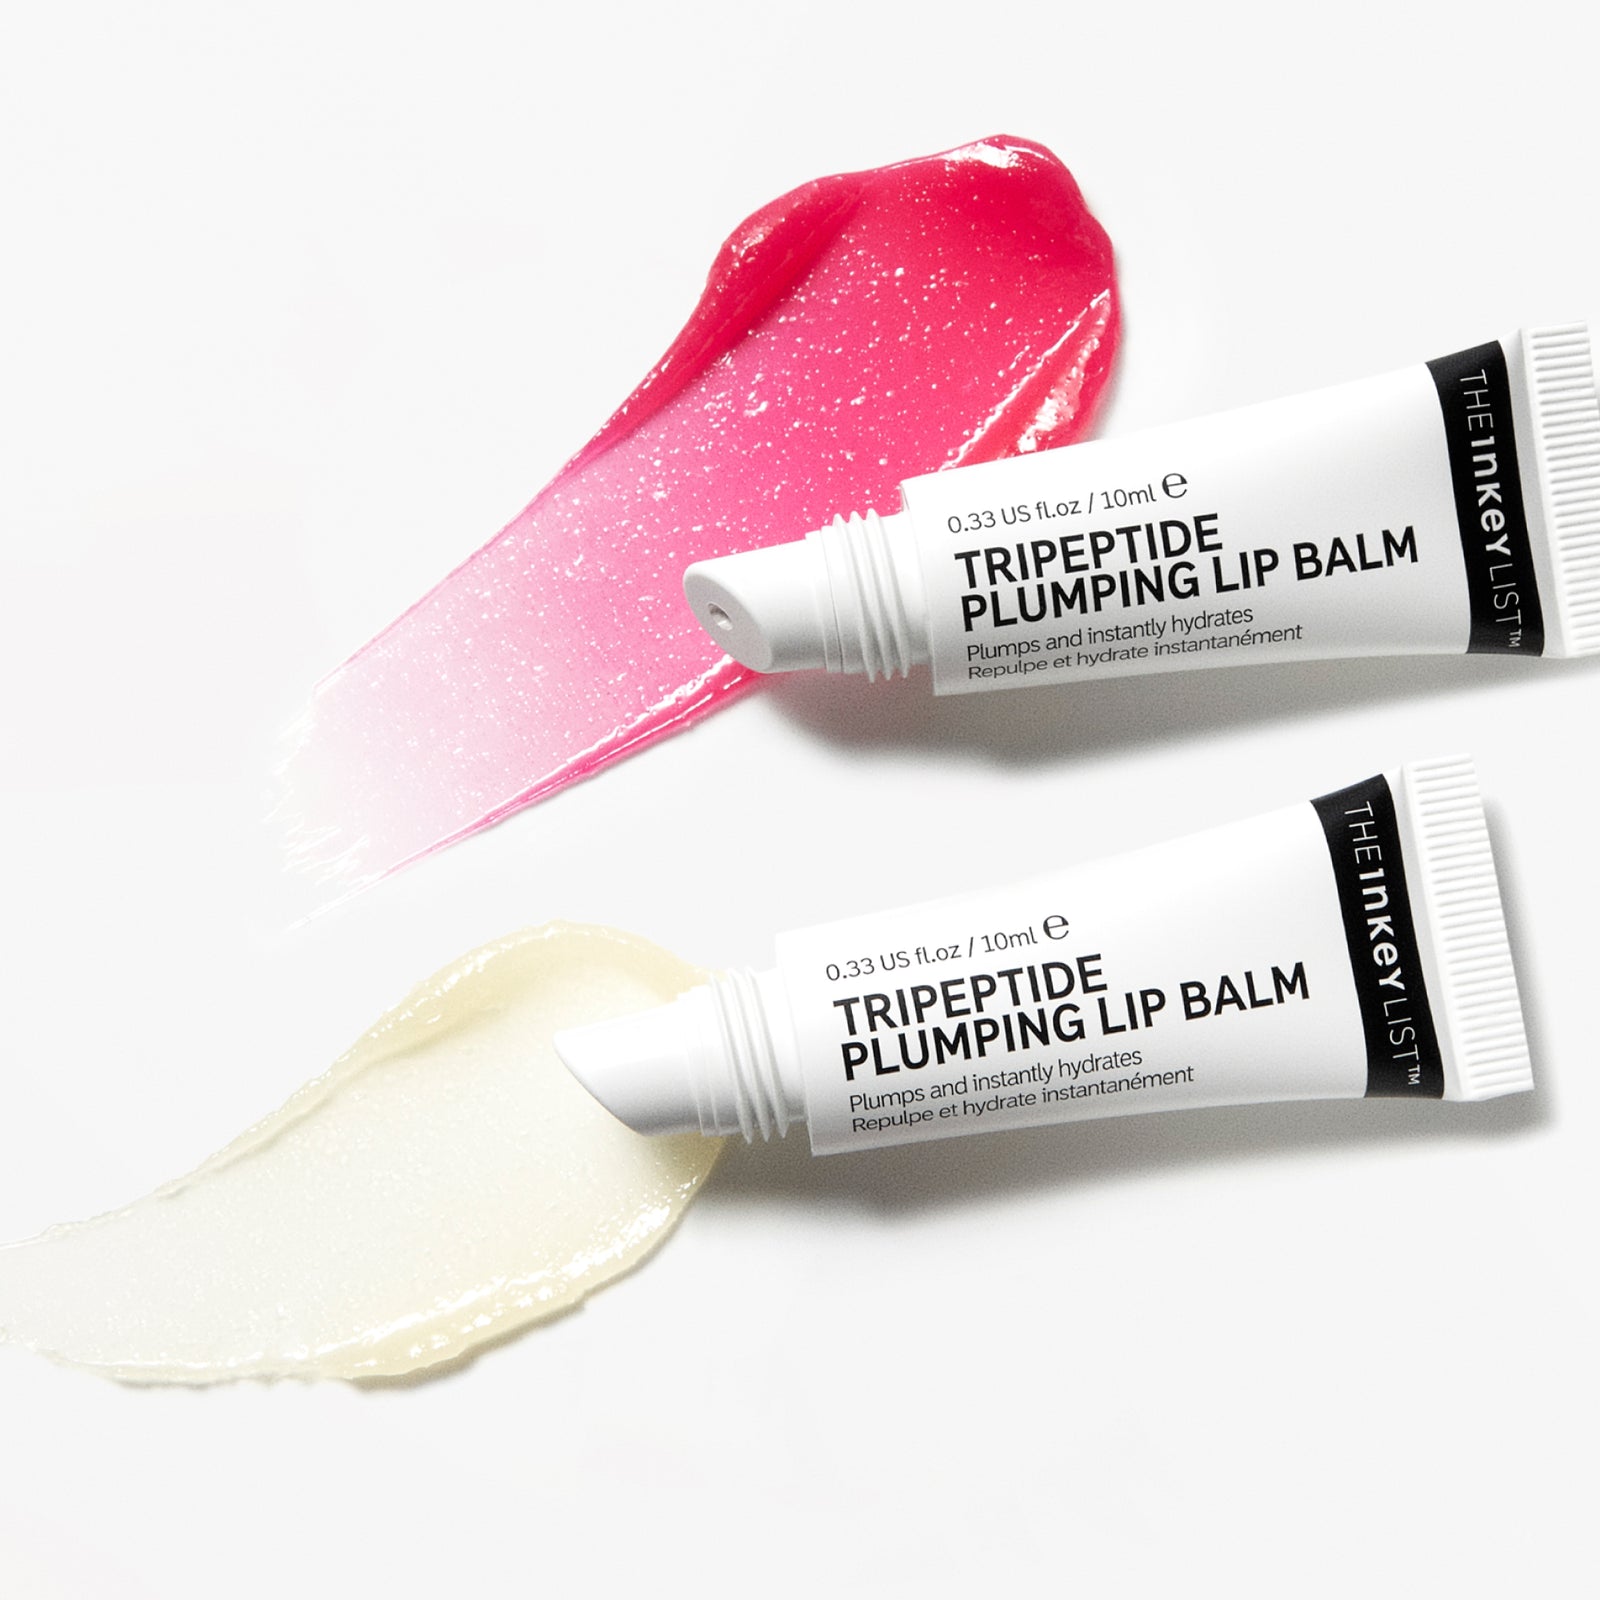 Goop shot of Pink and Clear Tripeptide Lip Balm with product tube